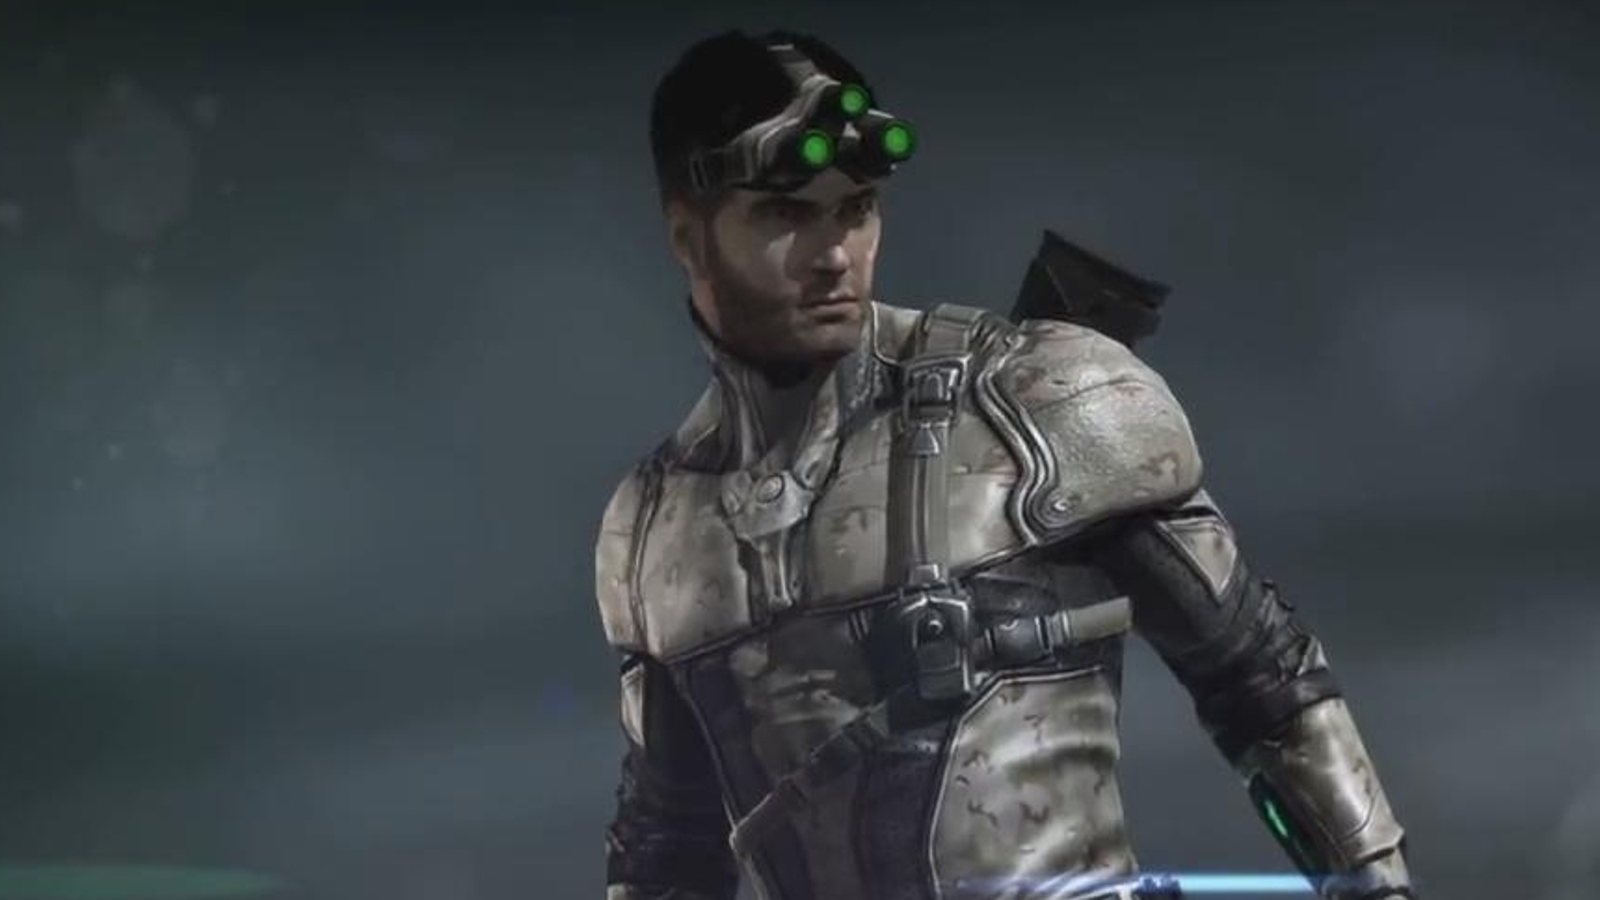 Buy XBox Splinter Cell: Stealth Action Redefined